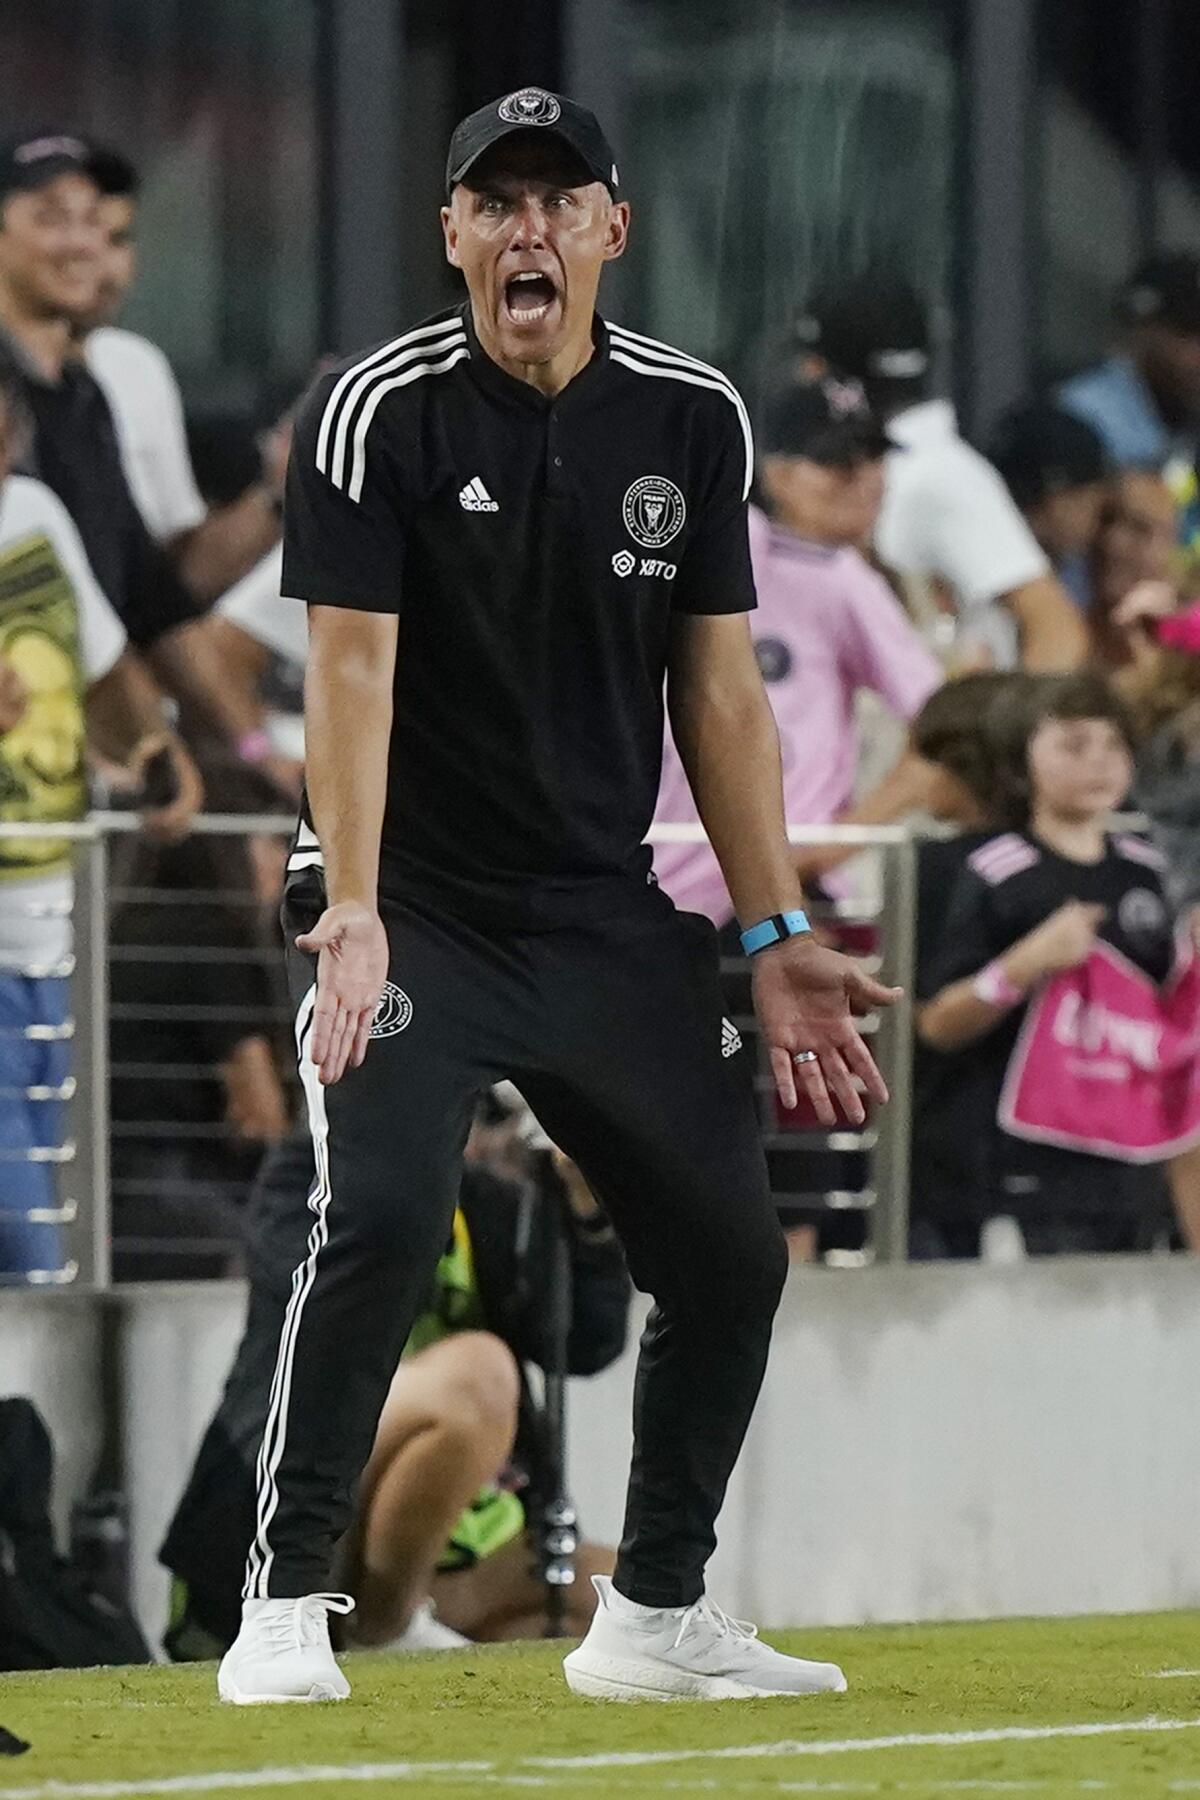 Inter Miami coach Phil Neville reacts during the second half of the team's MLS soccer match against Charlotte FC, Saturday, July 16, 2022, in Fort Lauderdale, Fla. (AP Photo/Marta Lavandier)